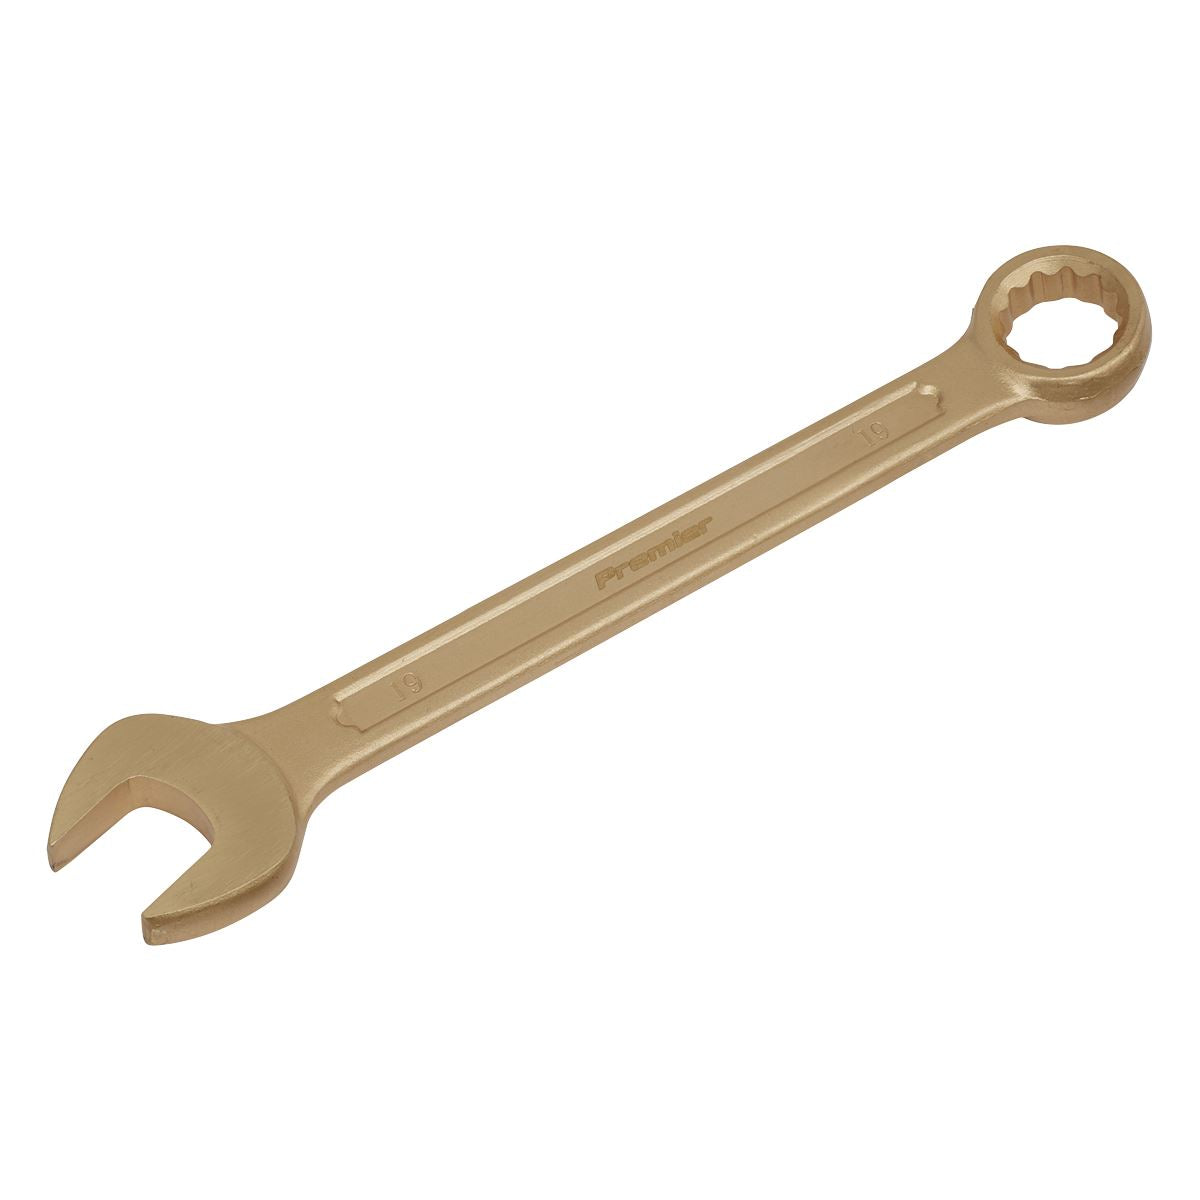 Sealey Premier Combination Spanner 19mm - Non-Sparking